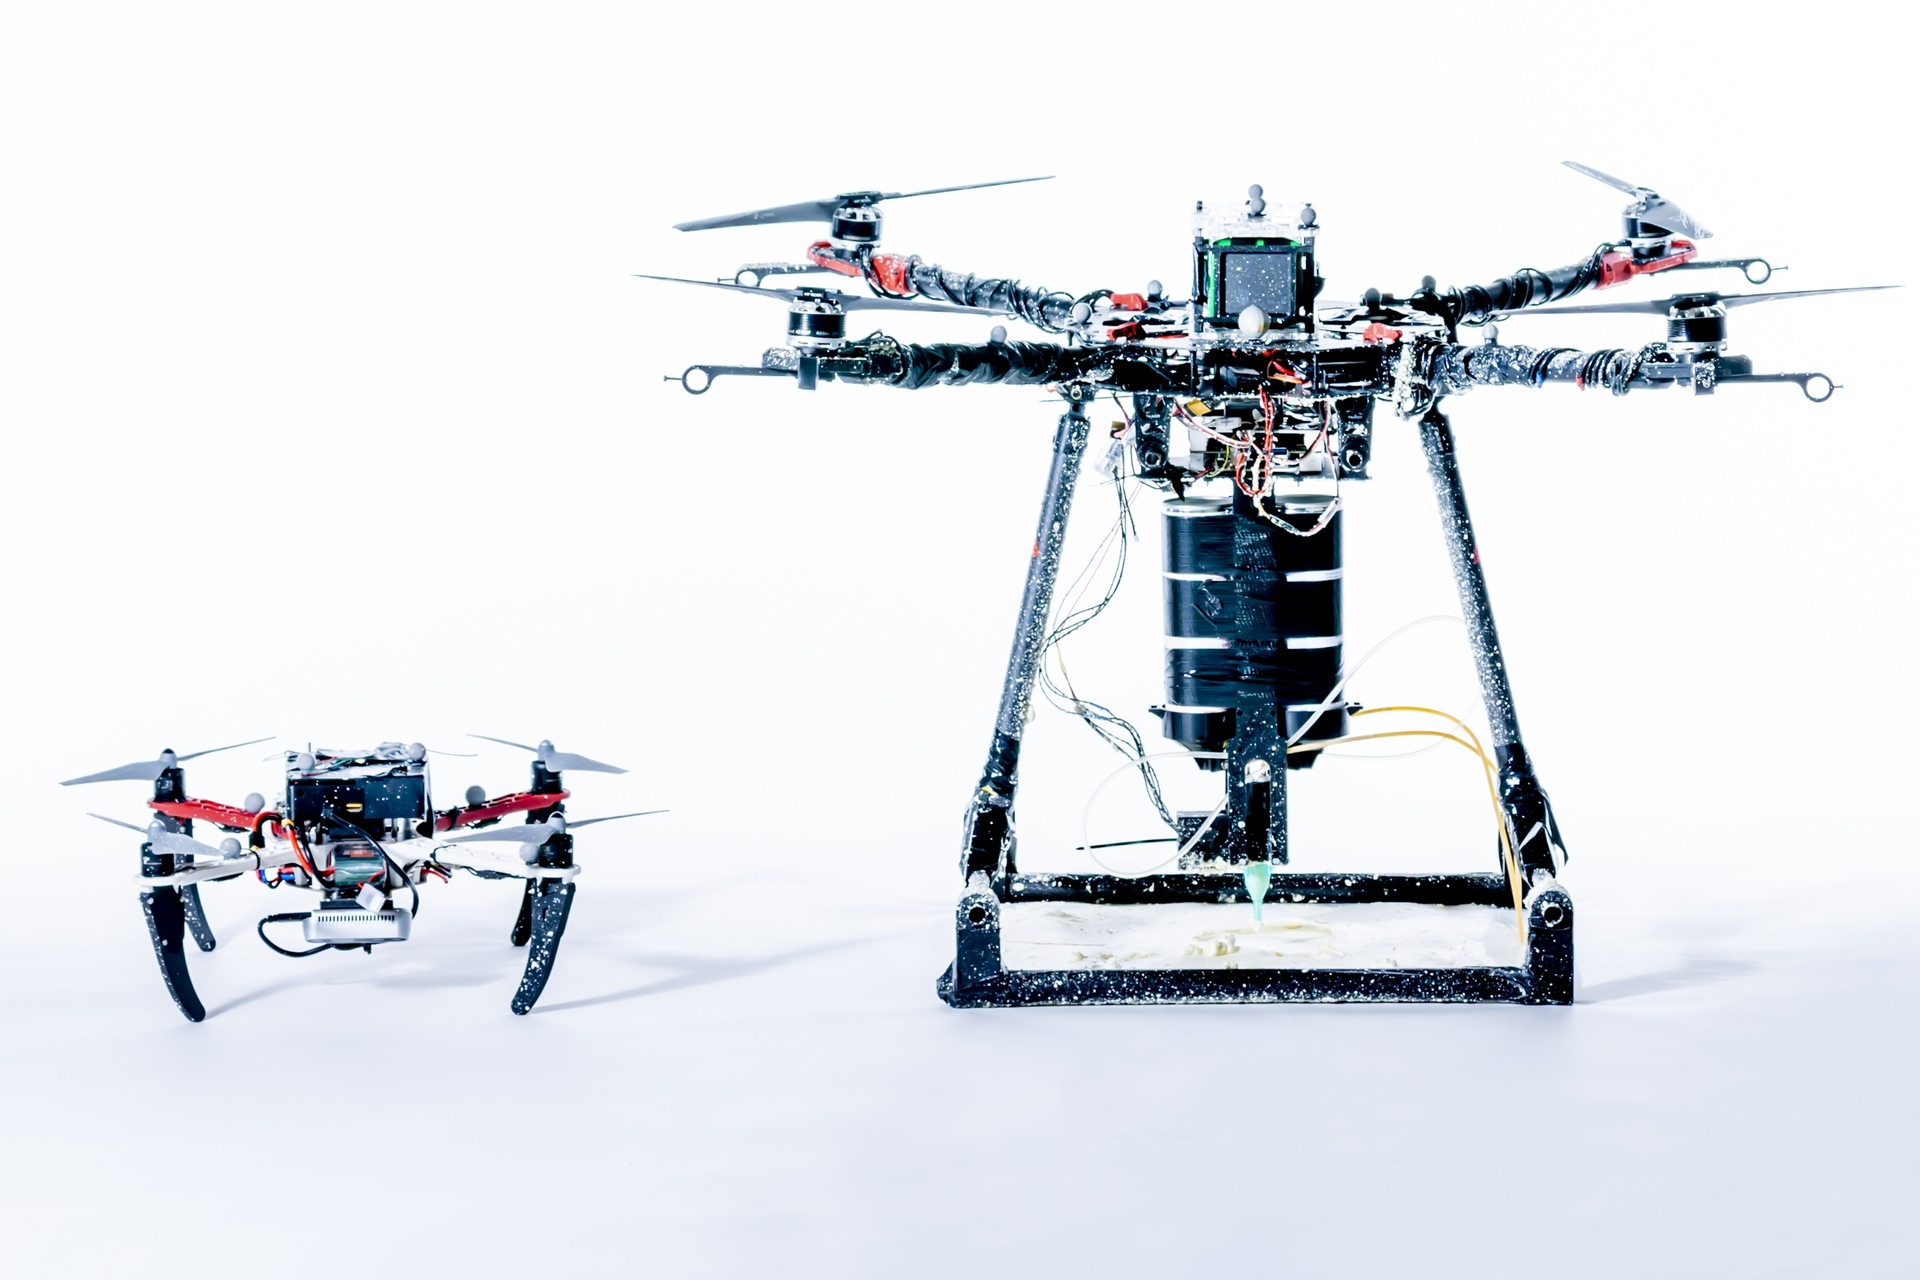 Collaborative drones: 3D printing through Aerial Additive Manufacturing or Aerial-AM